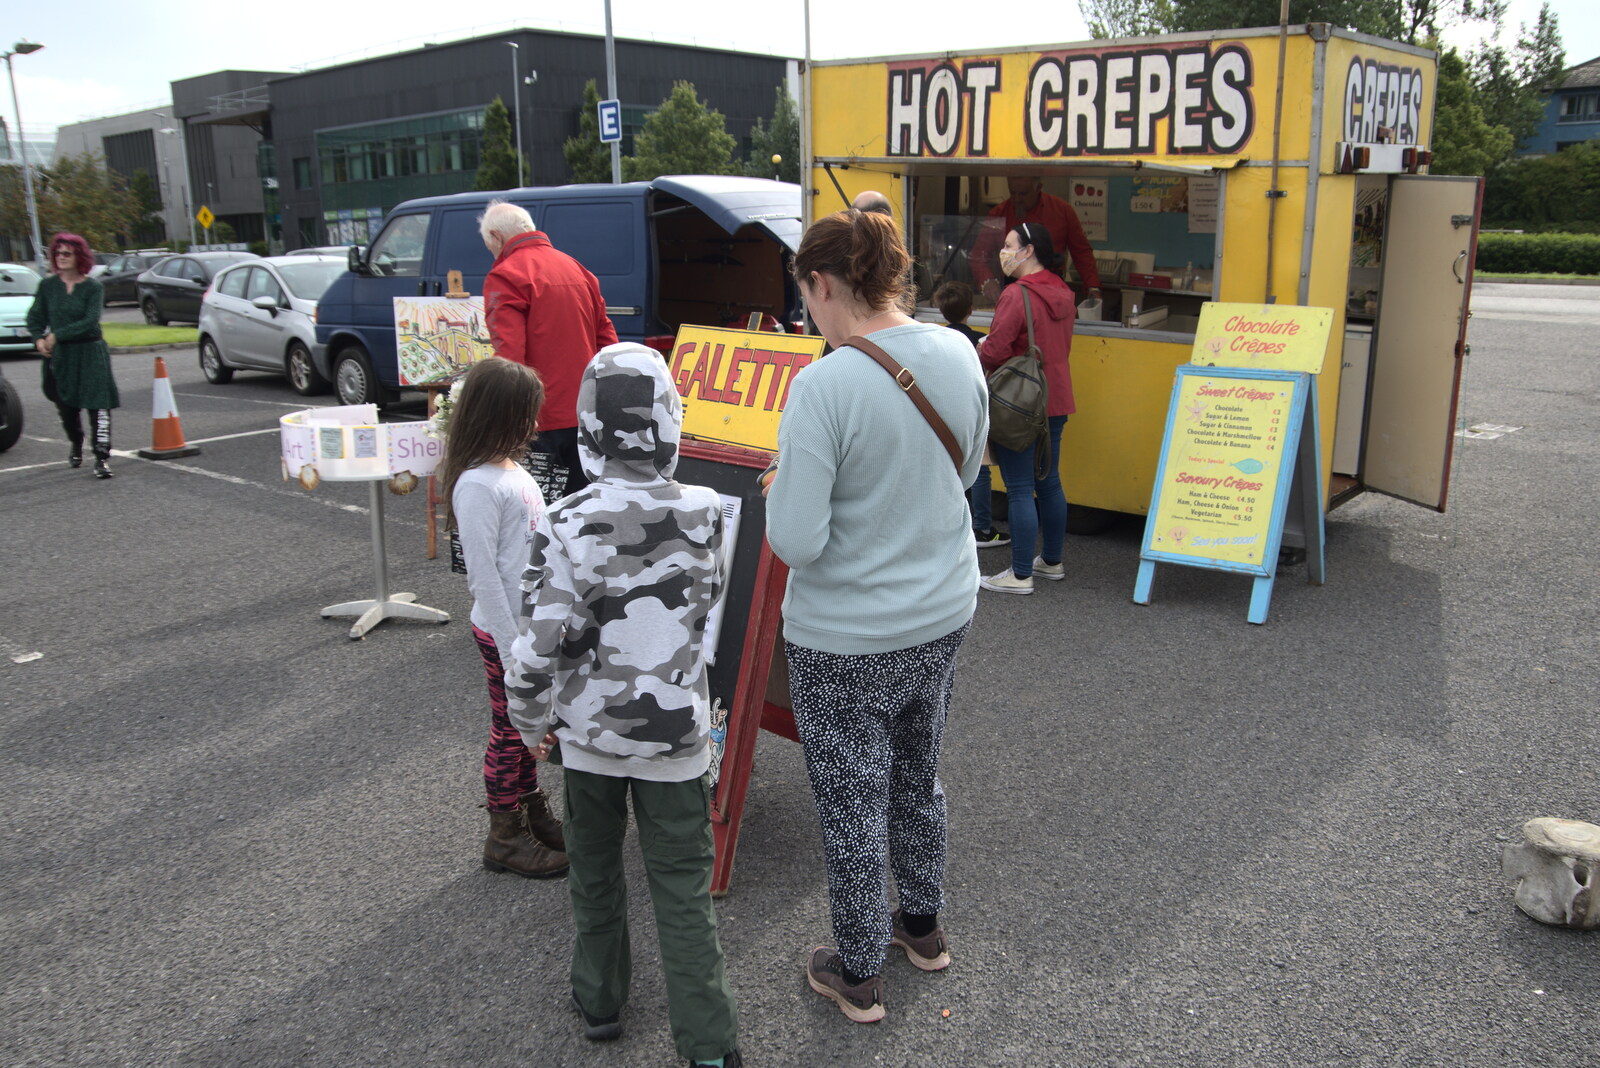 We queue up for some crepes from Manorhamilton and the Street Art of Dún Laoghaire, Ireland - 15th August 2021